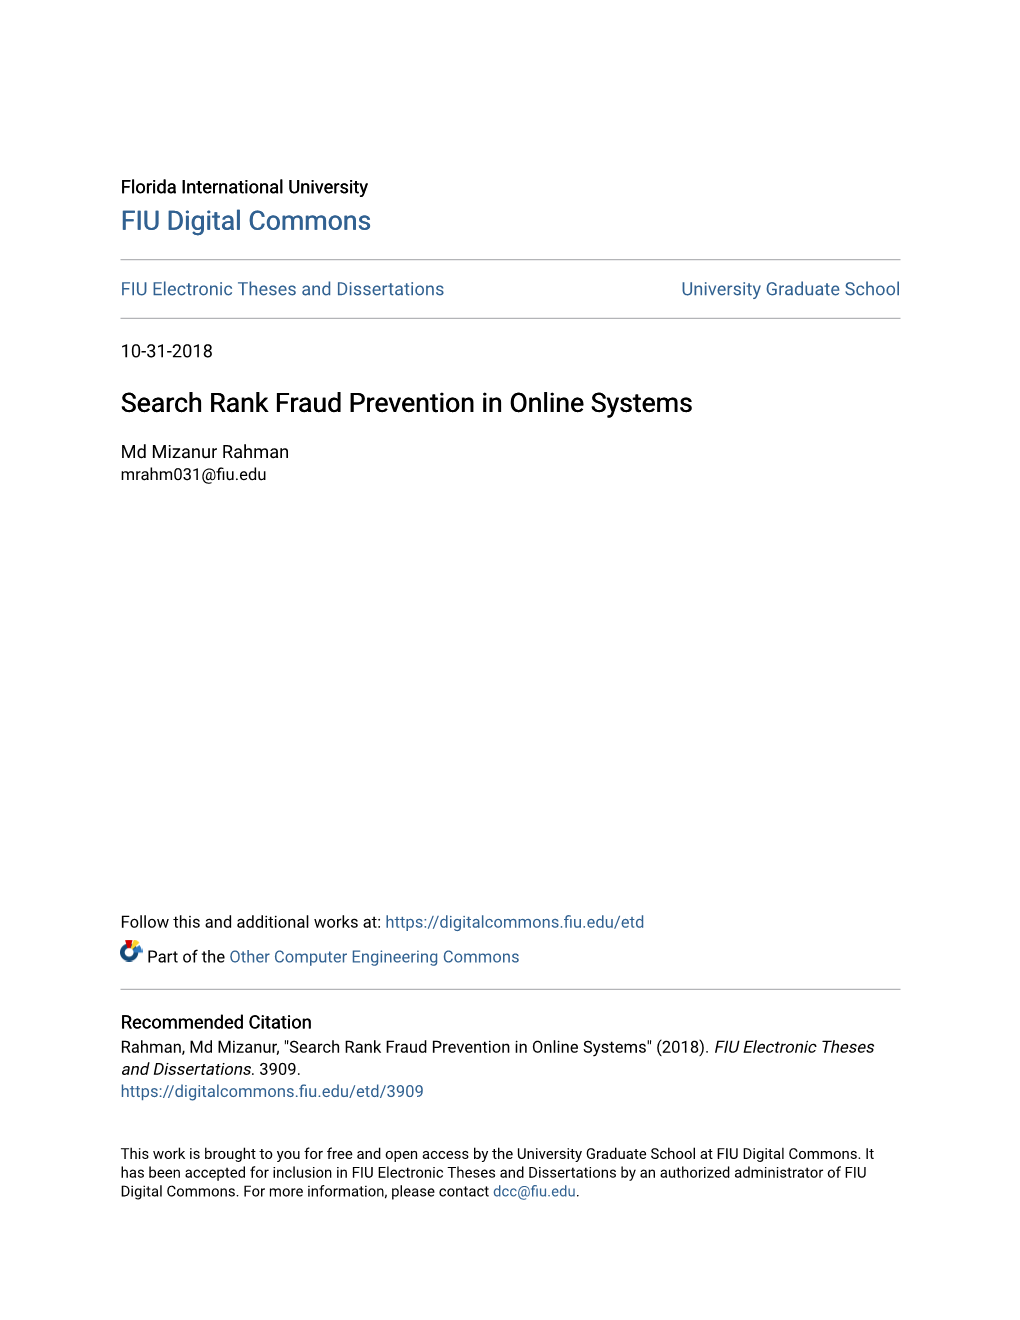 Search Rank Fraud Prevention in Online Systems